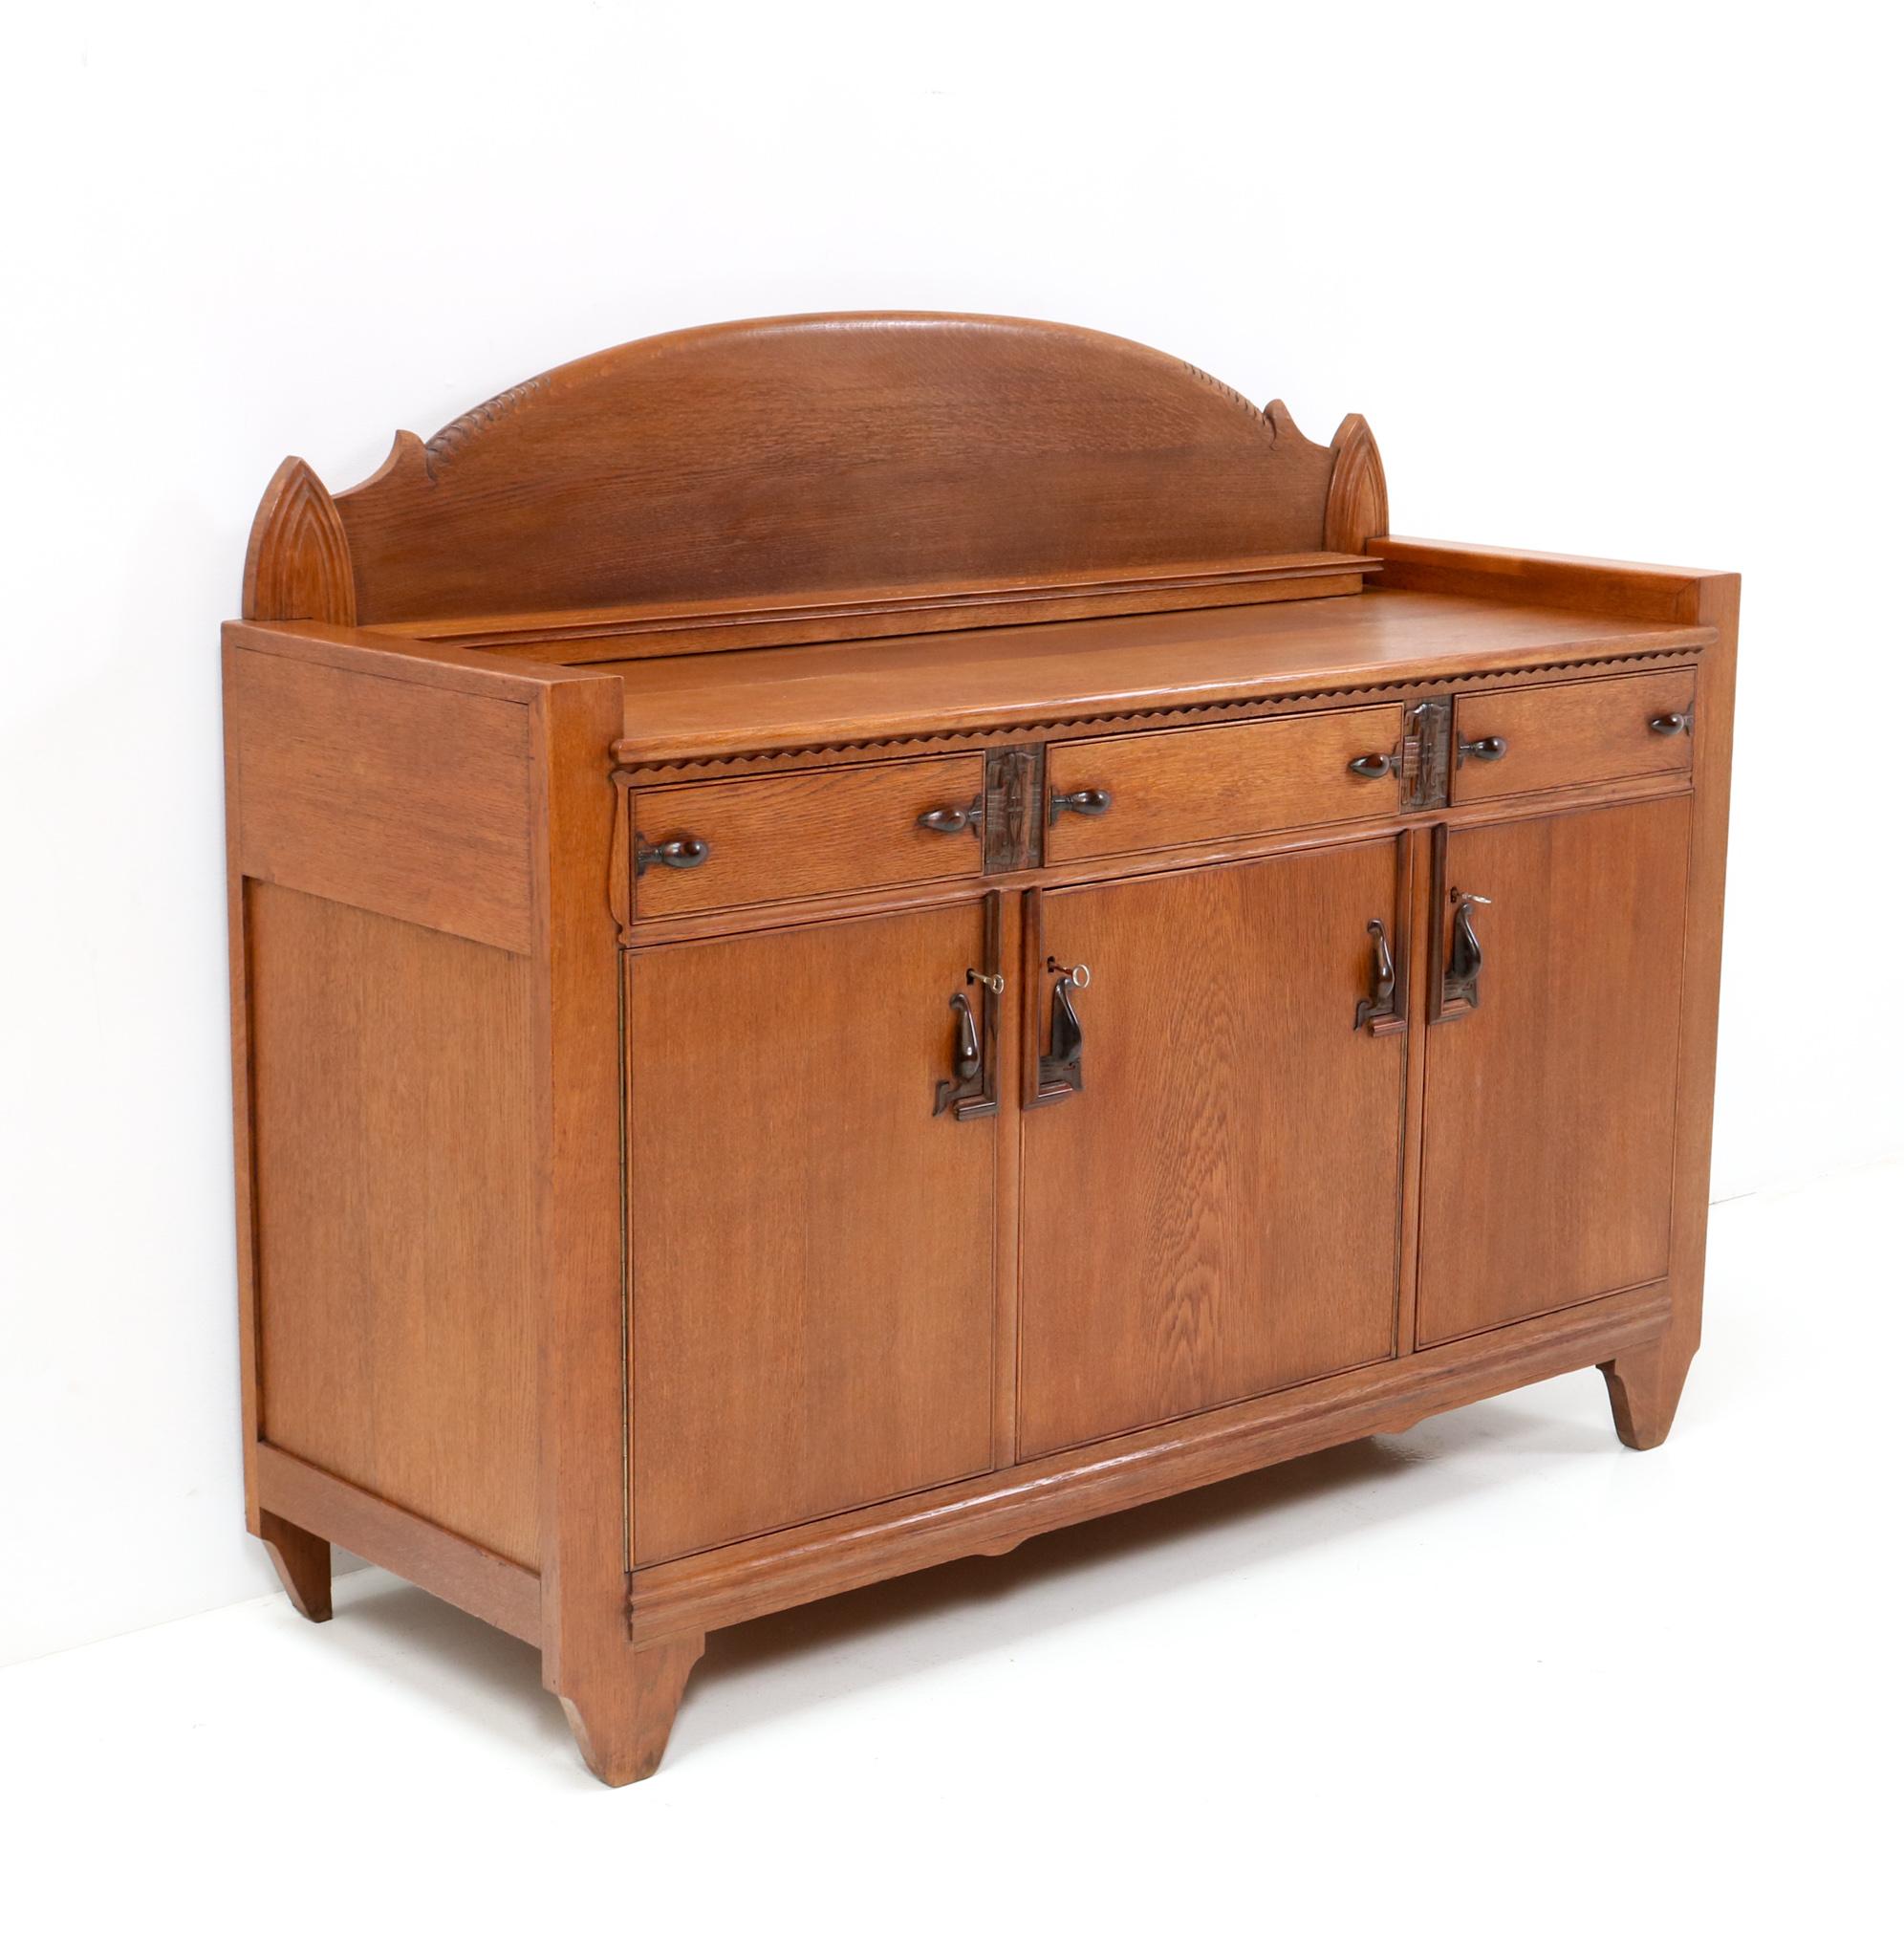 Magnificent and rare Art Deco Amsterdamse School credenza or sideboard.
Design attributed to Hildo Krop.
Striking Dutch design from the 1920s.
Solid oak and the doors are original with oak veneer.
The elegant and stylish hand-carved handles on doors